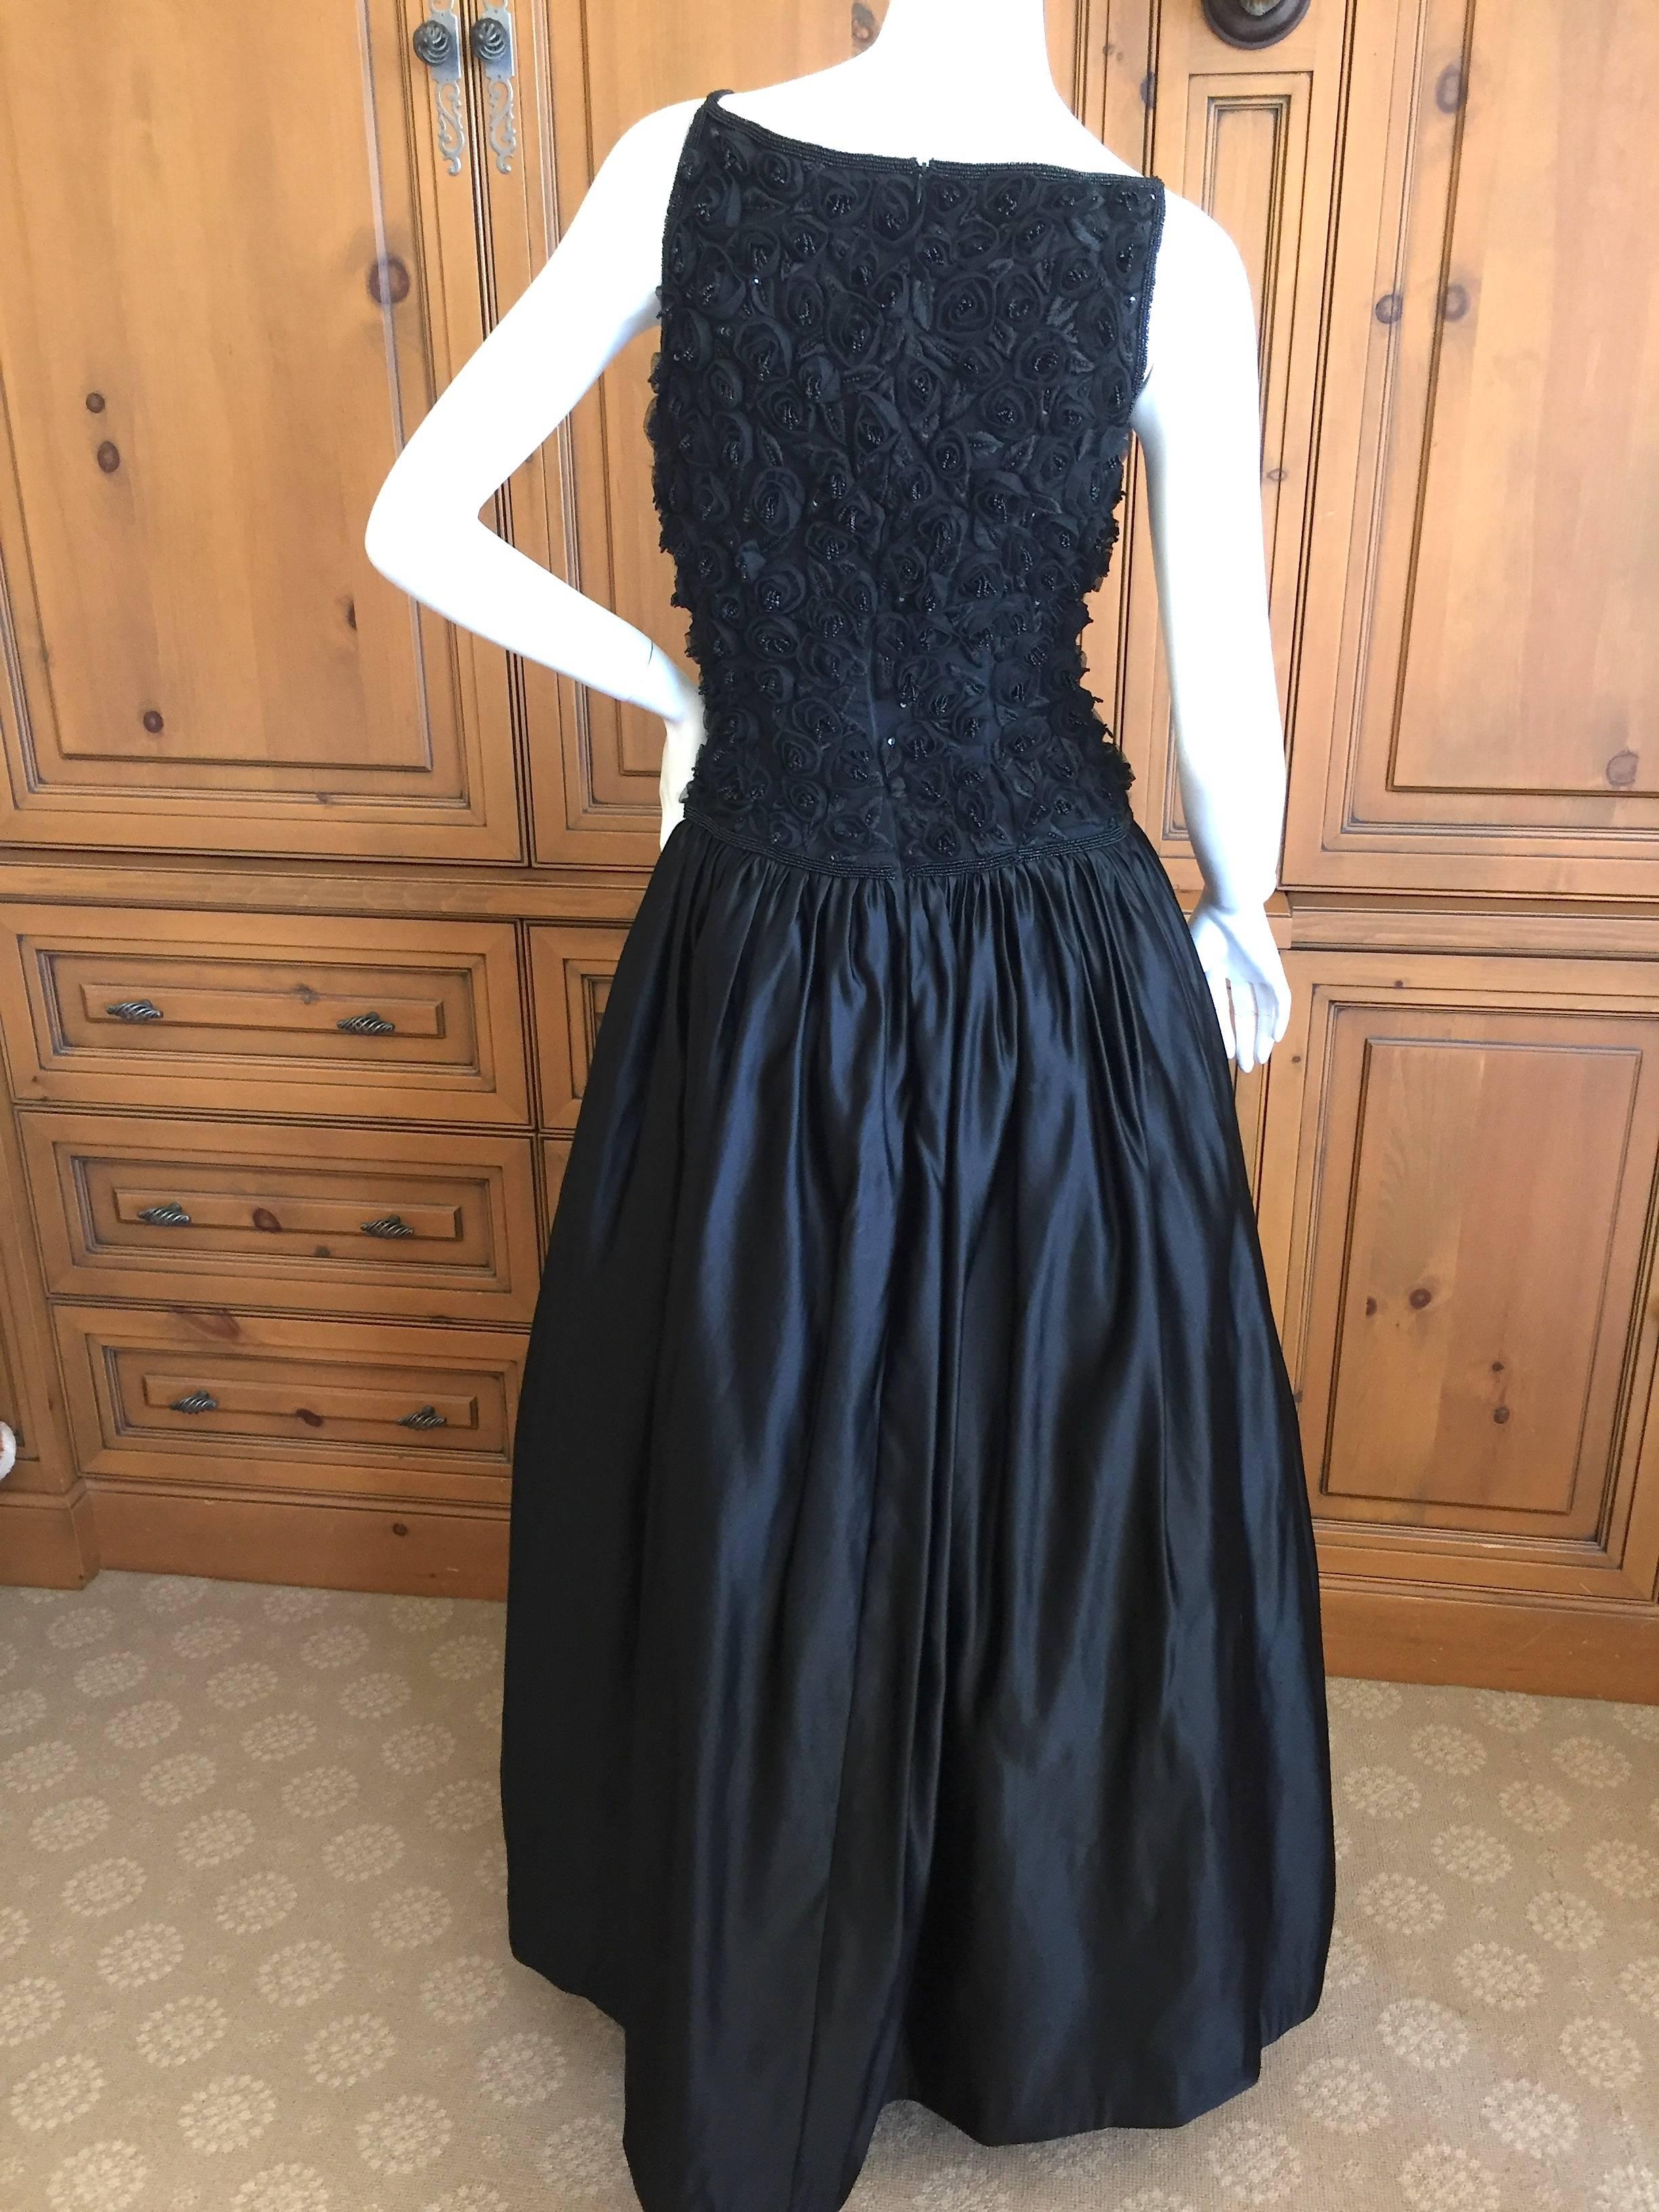 Yves Saint Laurent Numbered Haute Couture Evening Dress 2